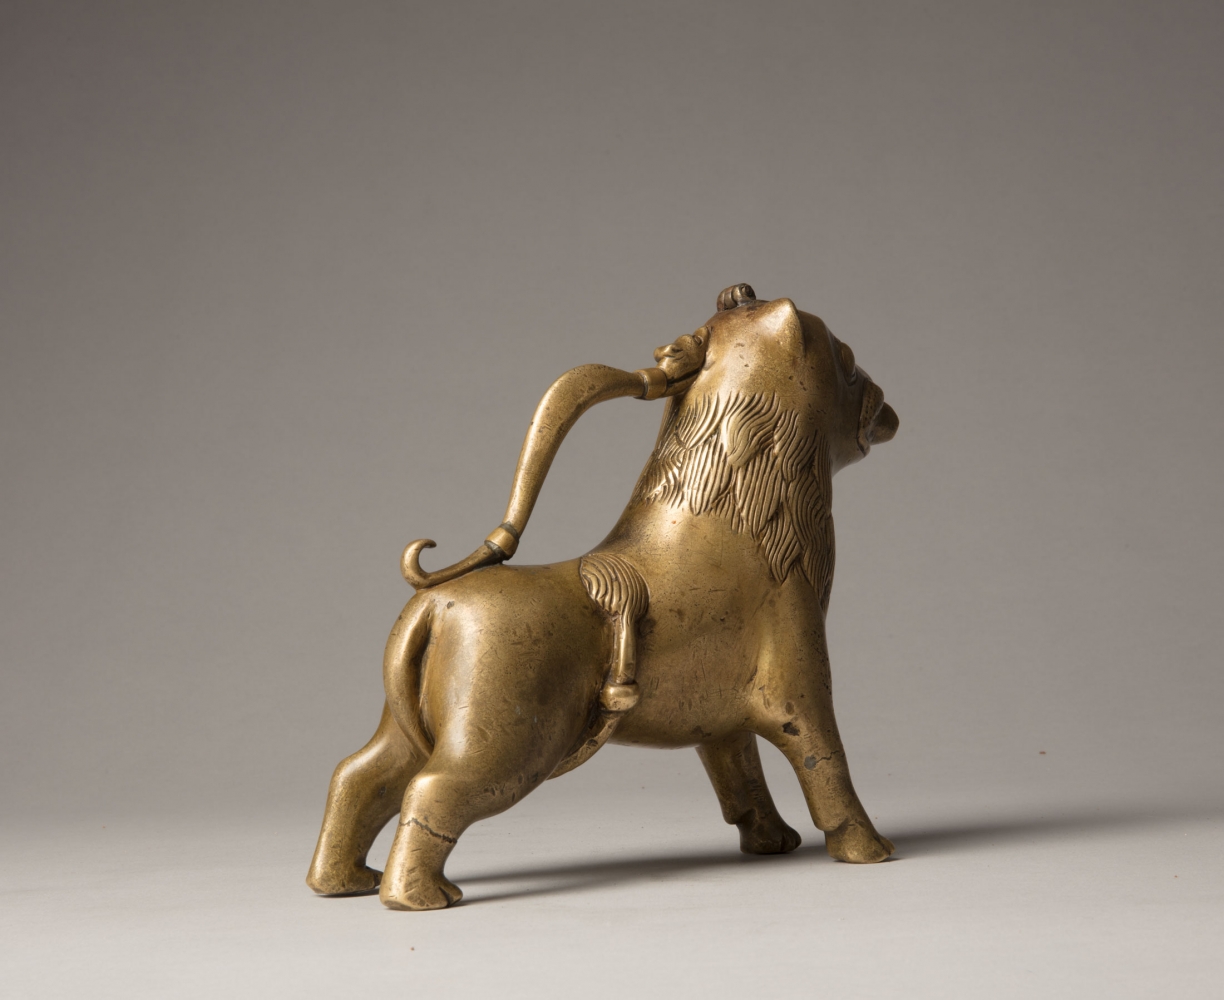 An aquamanile in the form of a lion, Early 13th century
Germany, probably Lower Saxony
cast copper alloy with fine soldered repairs to the handle at its upper and lower connecting points. Hairline fractures to the legs in two places. The hinged lid a modern replacement.
6 3/4 x 9 1/8 x 2 1/8 inches
(17.1 x 22.9 x 5.5 cm)